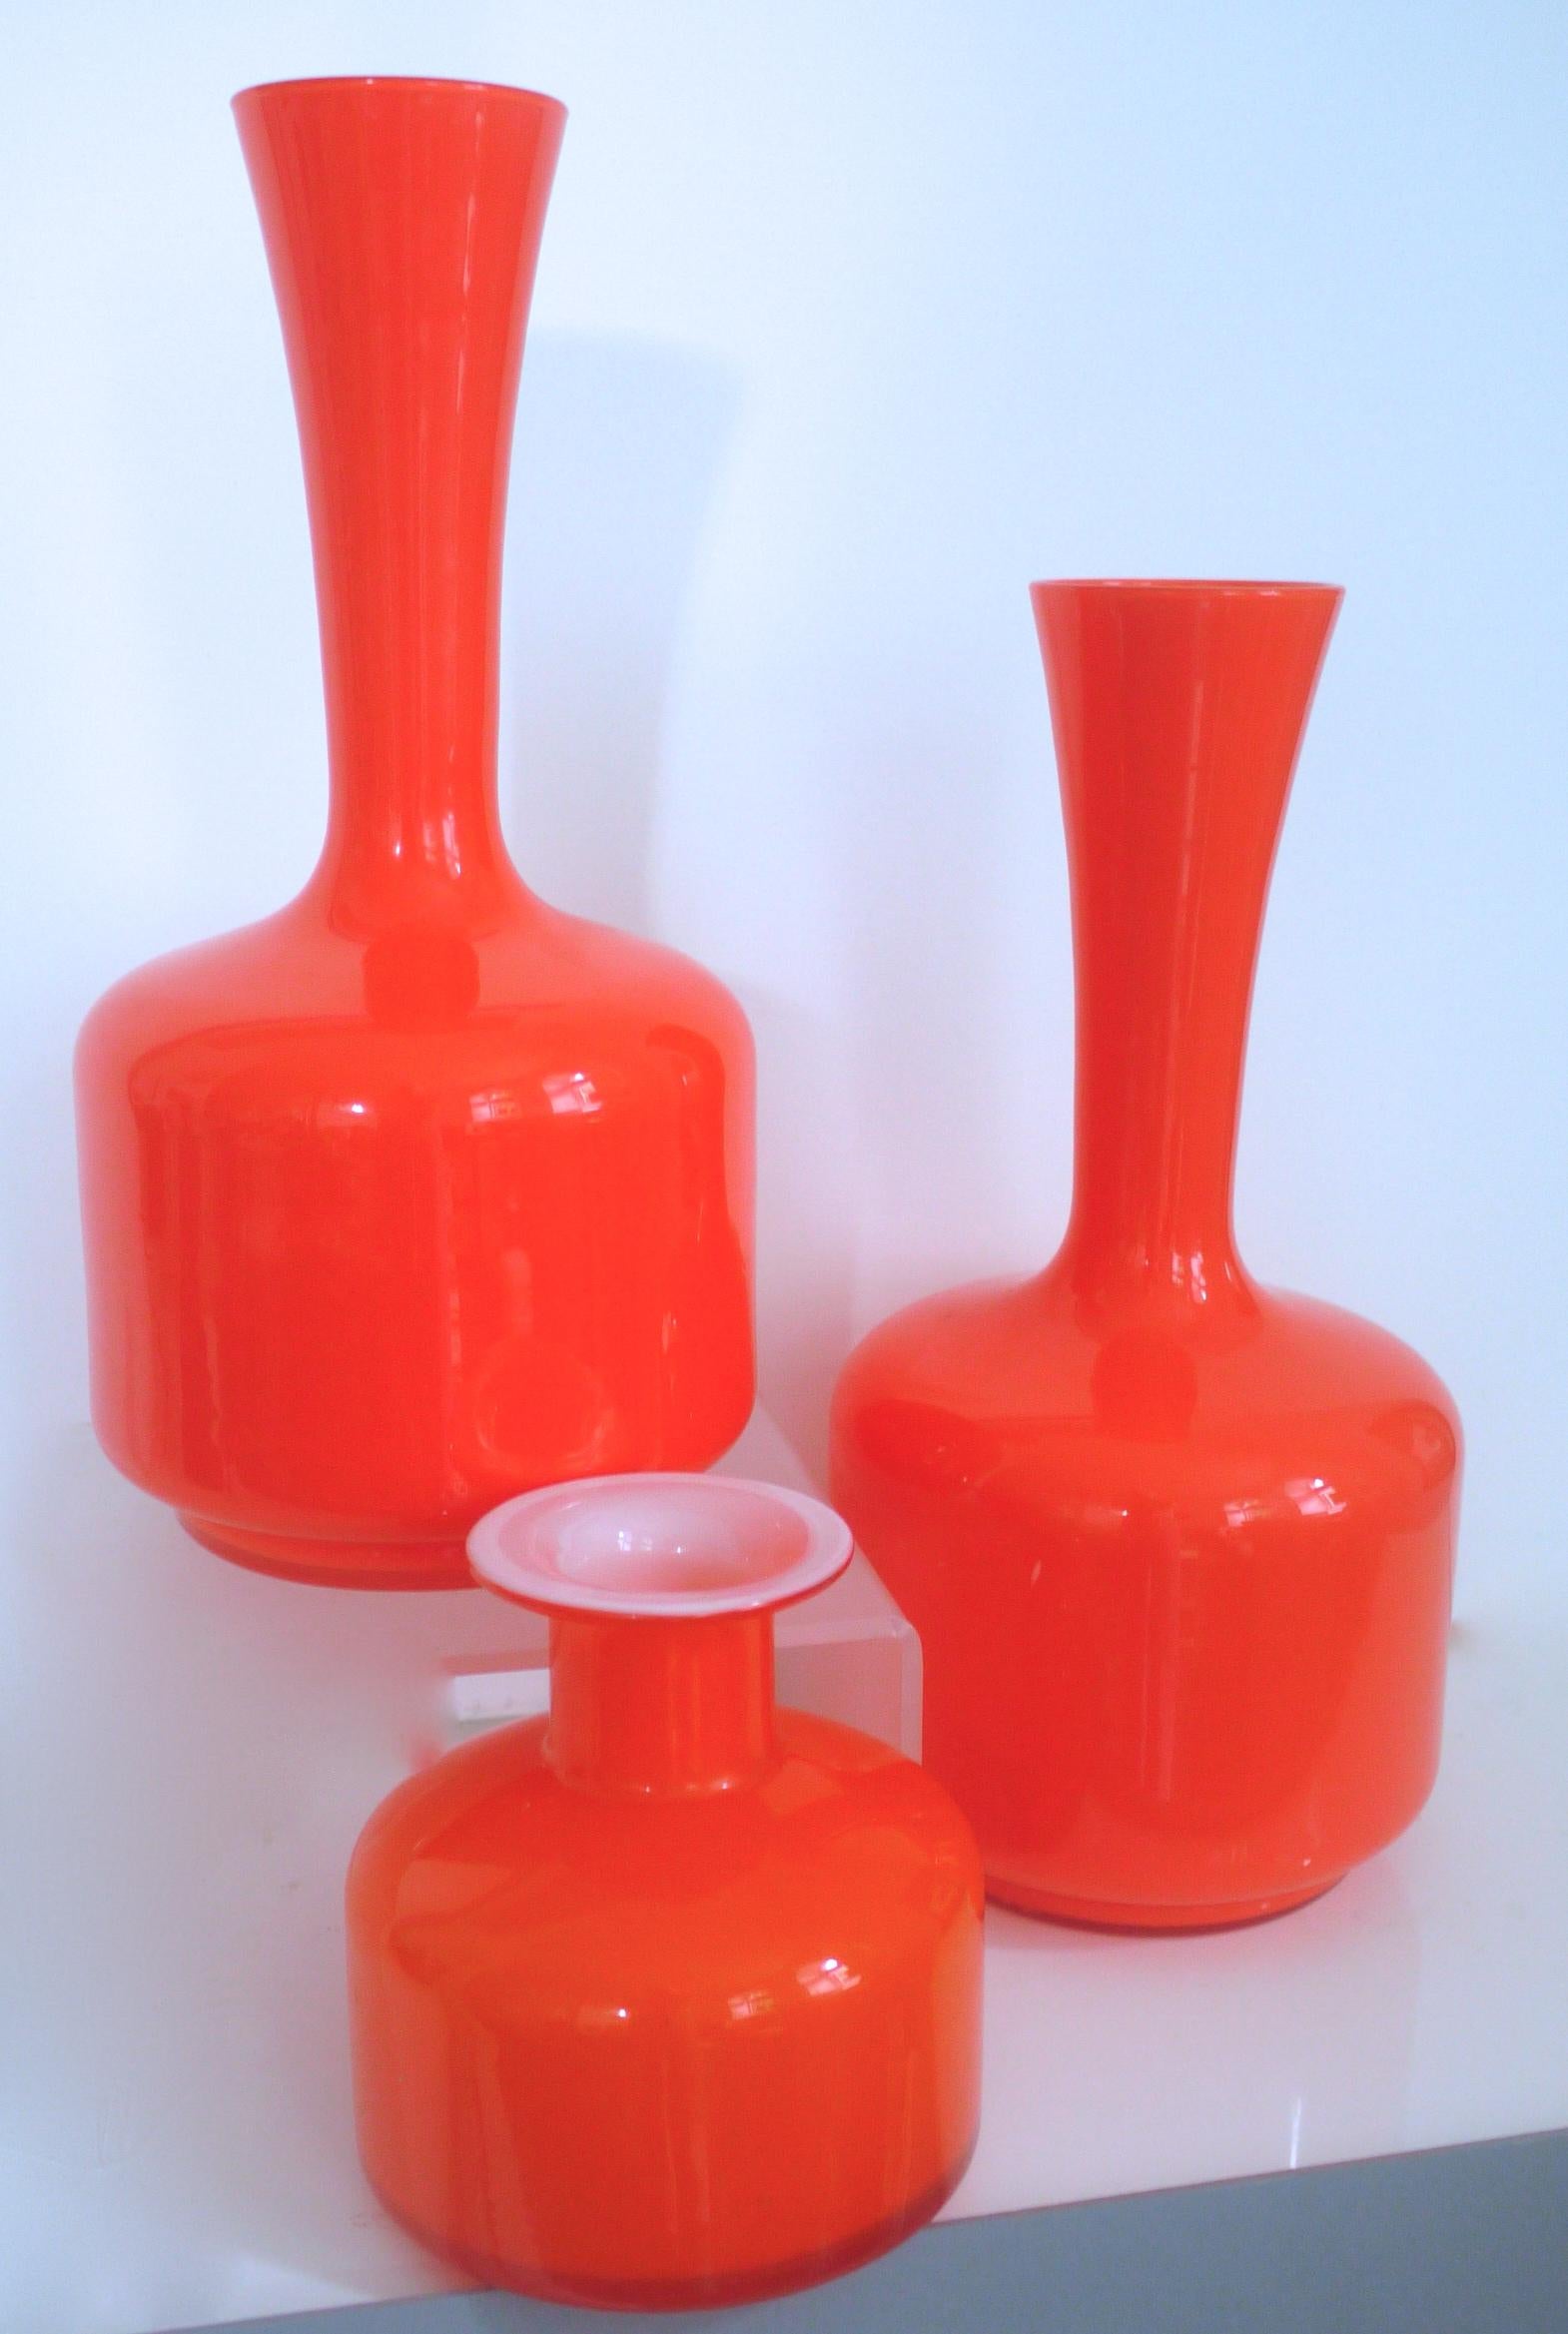 Glass Mid-Century Modern orange vases/pitcher - 1960s in style of Holmegaard/Aseda

One of the vessels has a small white inclusion 3mm approximately - in the style of Scandinavian Holmgaard possibly ASEDA 

Measures: Height 32 cms
Diameter 19